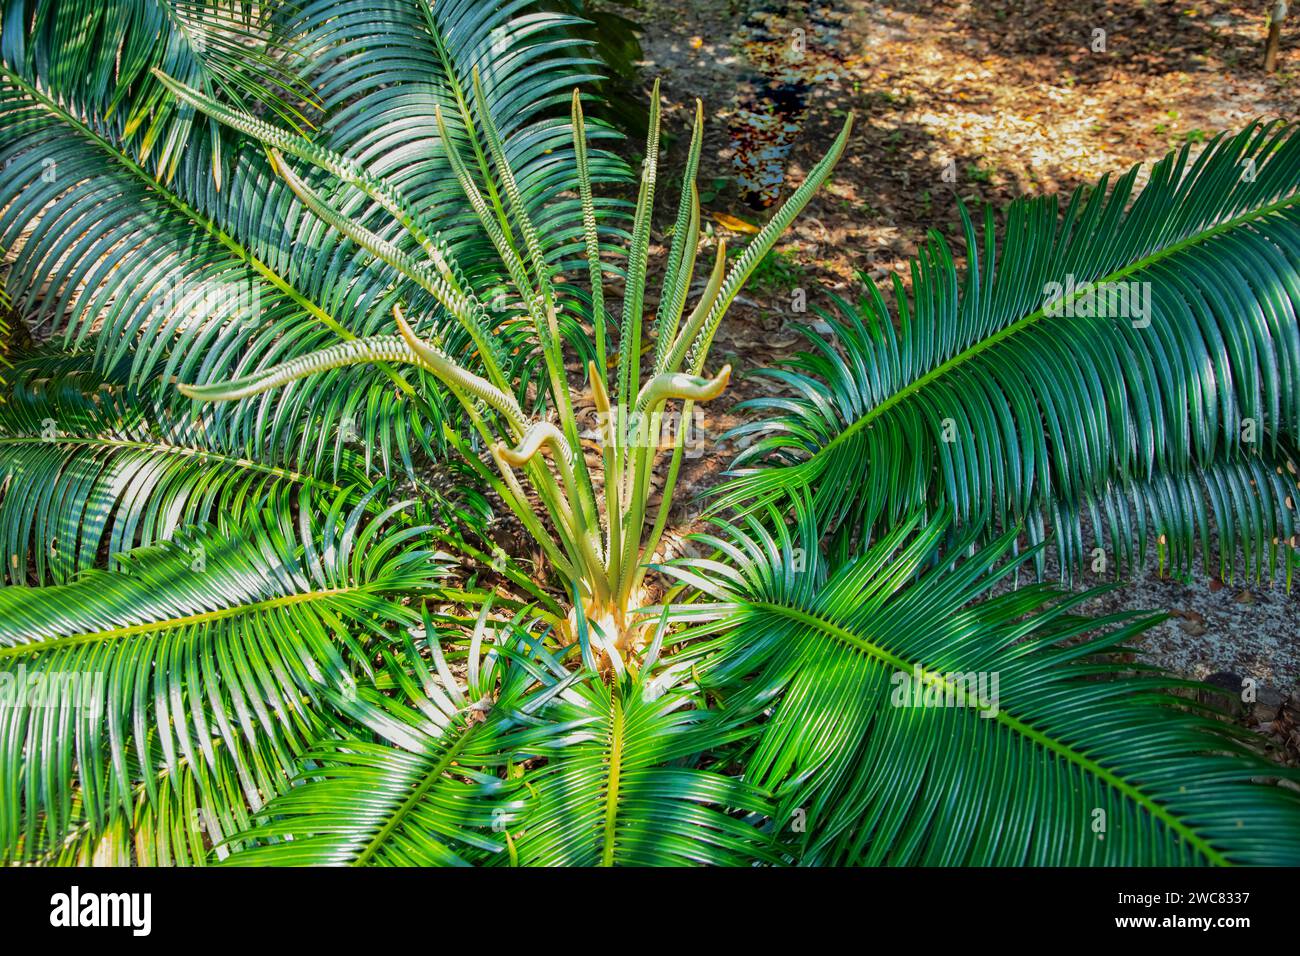 Cycas Revoluta plant young shoots of palm leaves grow up in garden traditional plant for Madagascar Stock Photo